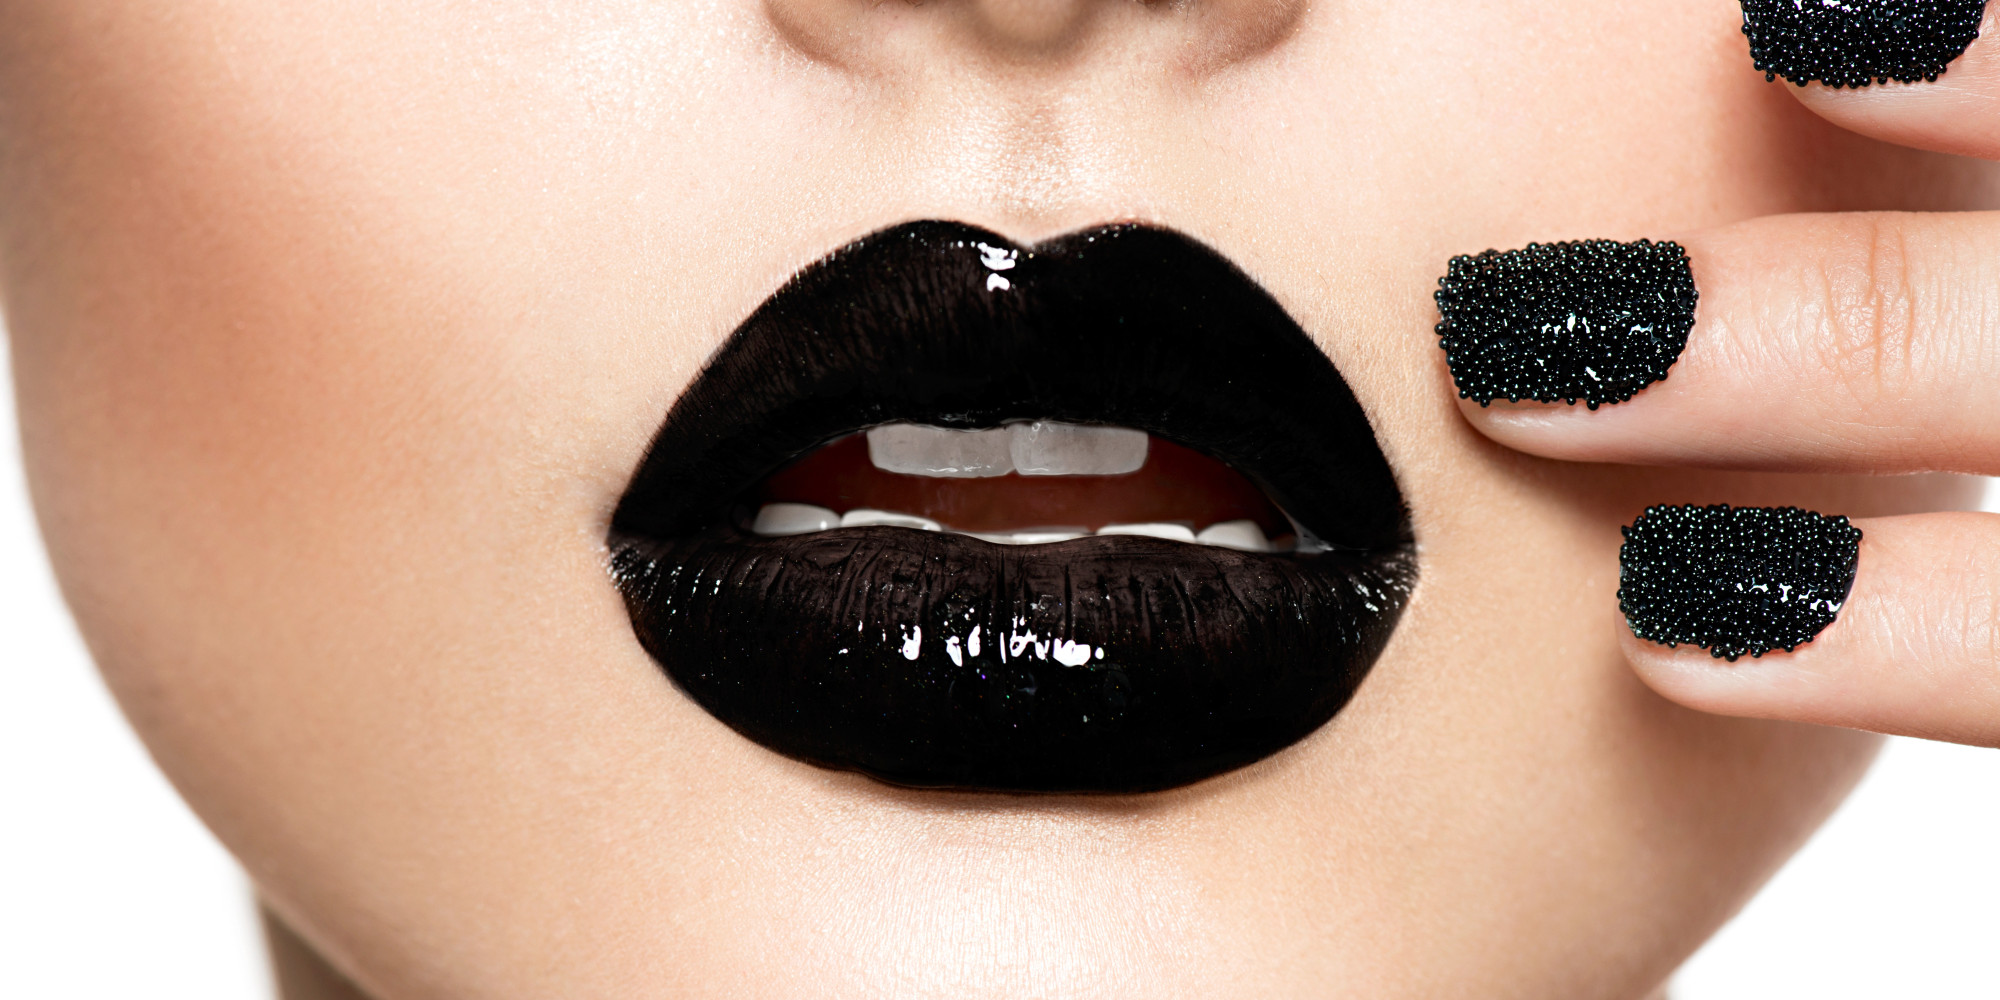 13 Beauty Risks To Take Before You Die